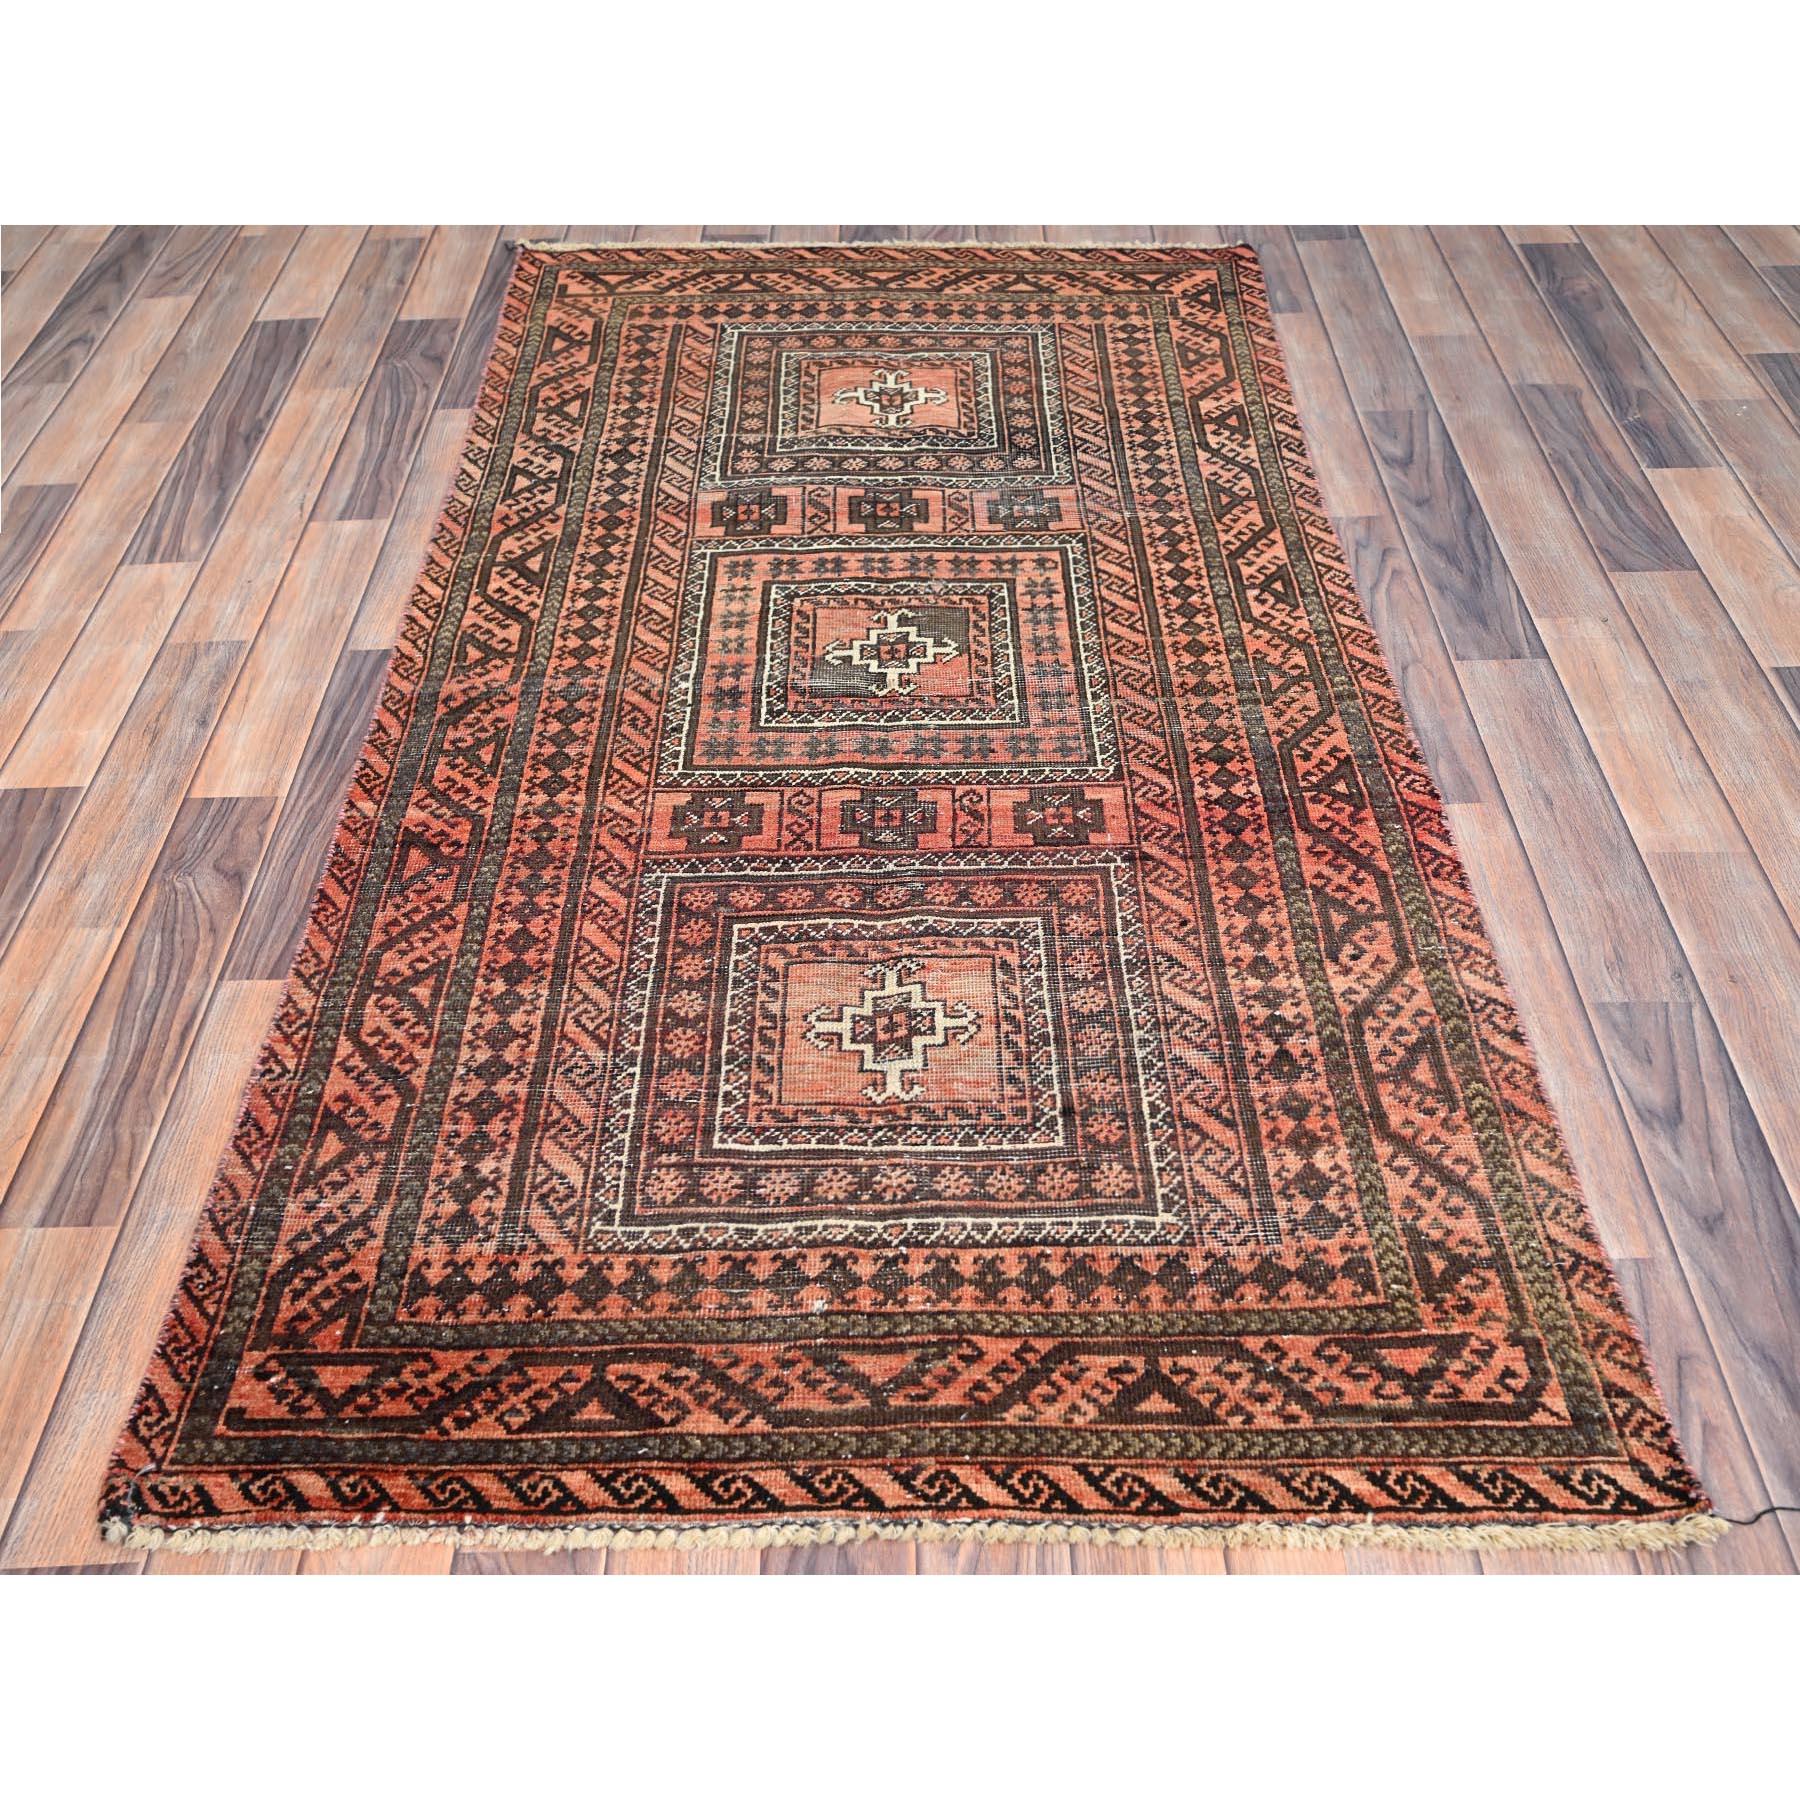 Medieval Brown Sheared Low Evenly Worn Vintage Persian Baluch Multiple Border Clean Rug For Sale